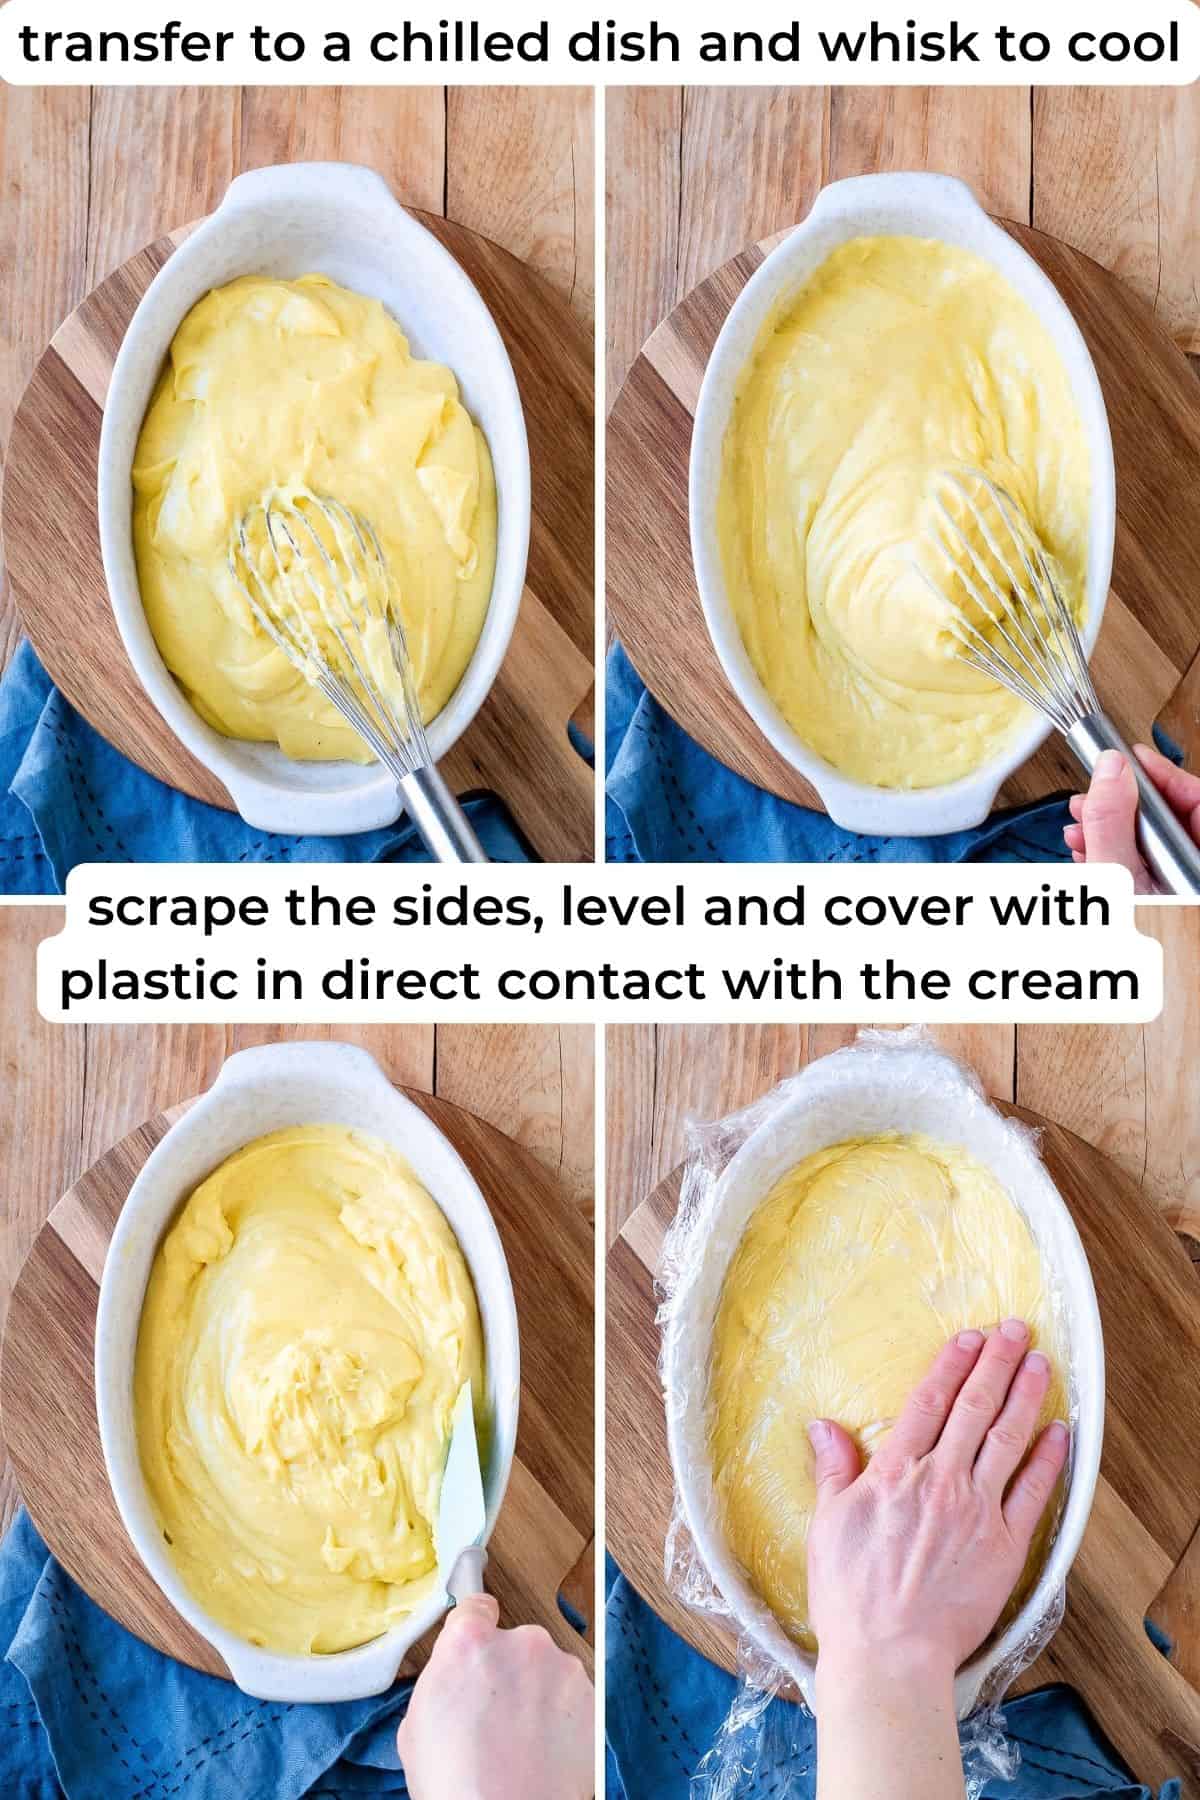 Arranging pastry cream in a chilled dish to cool.